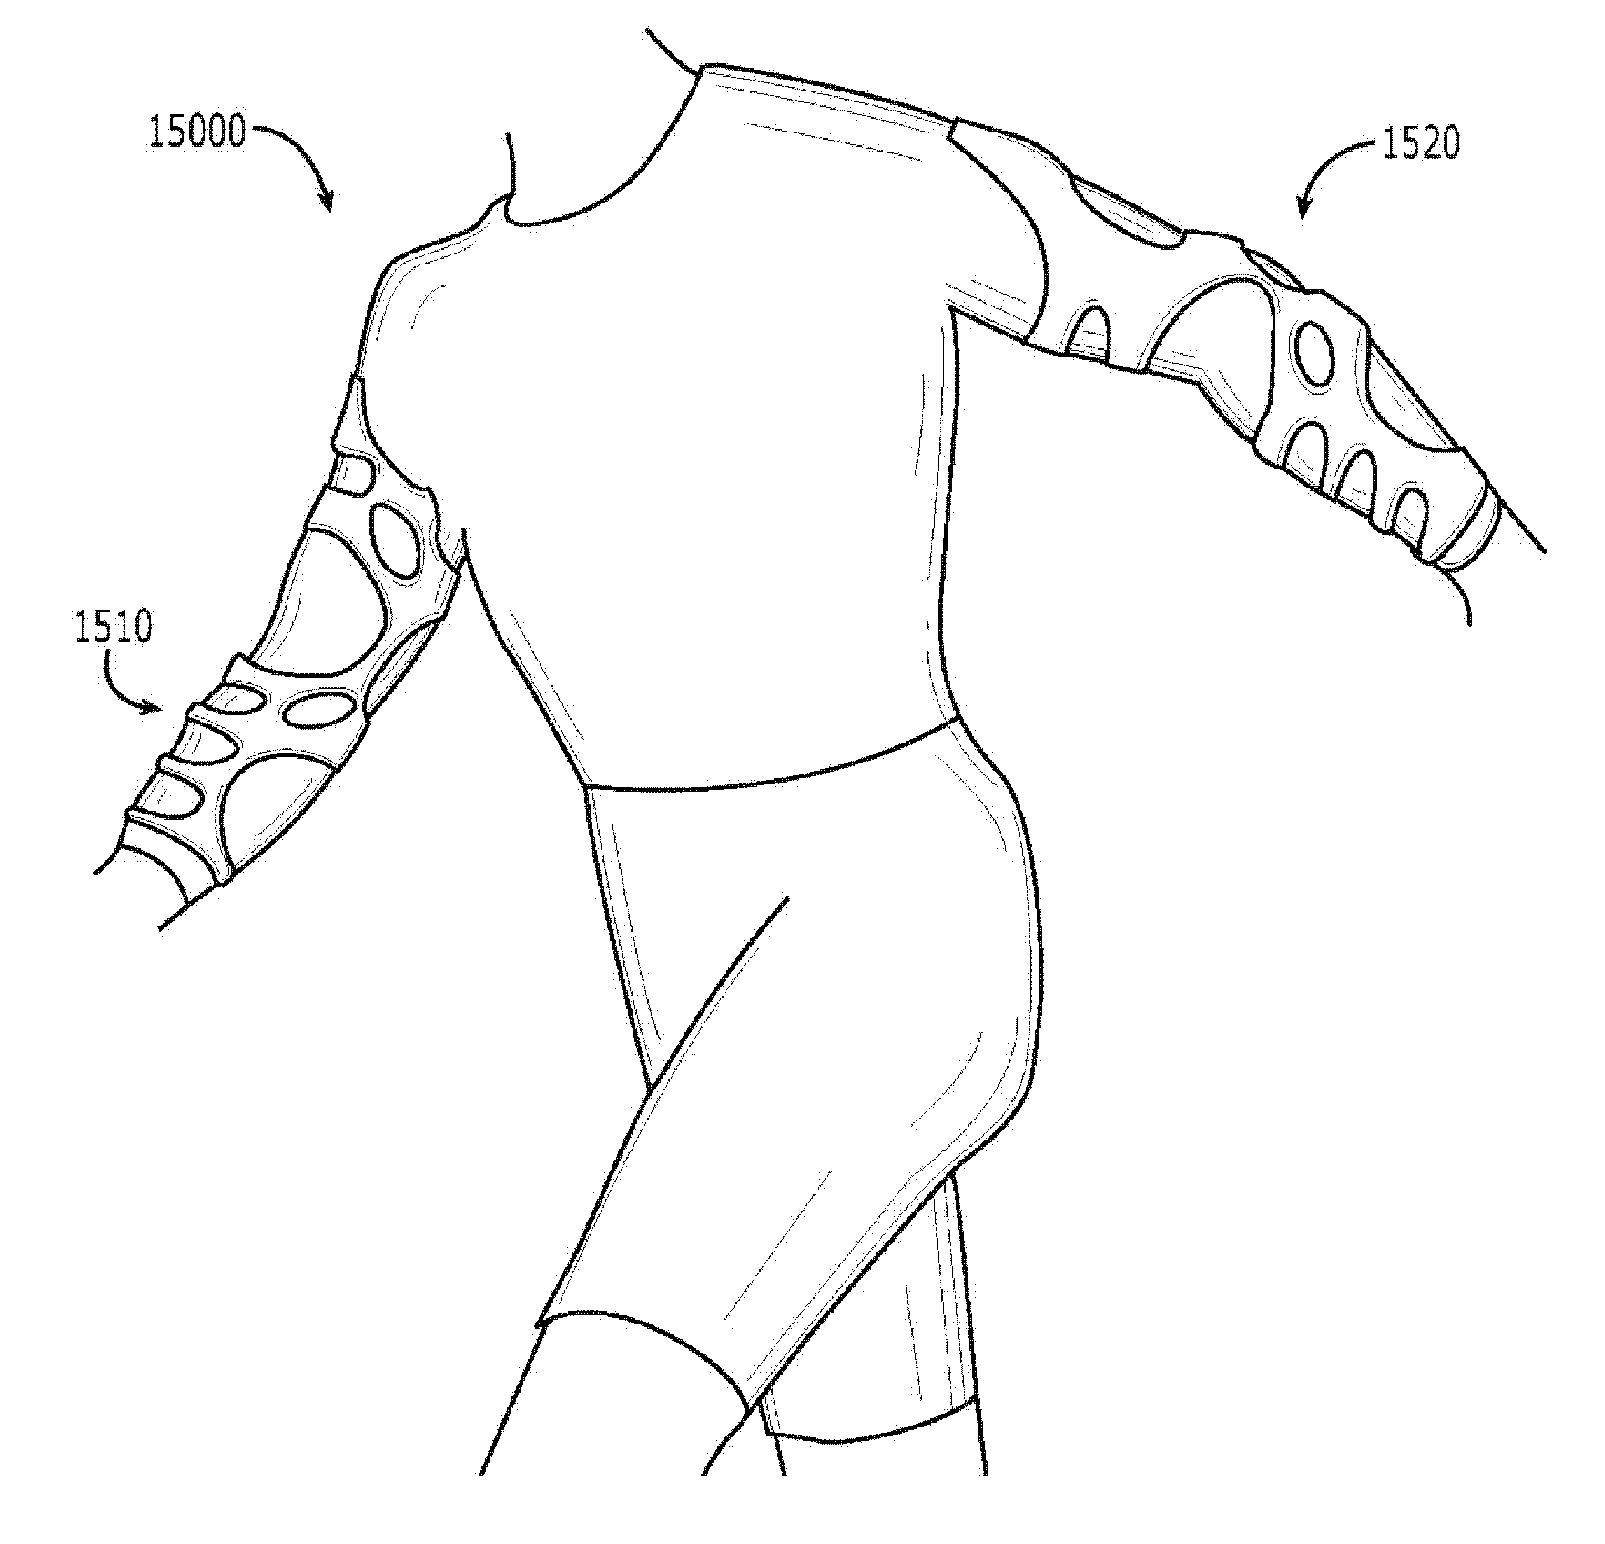 Support with framework fastened to garment